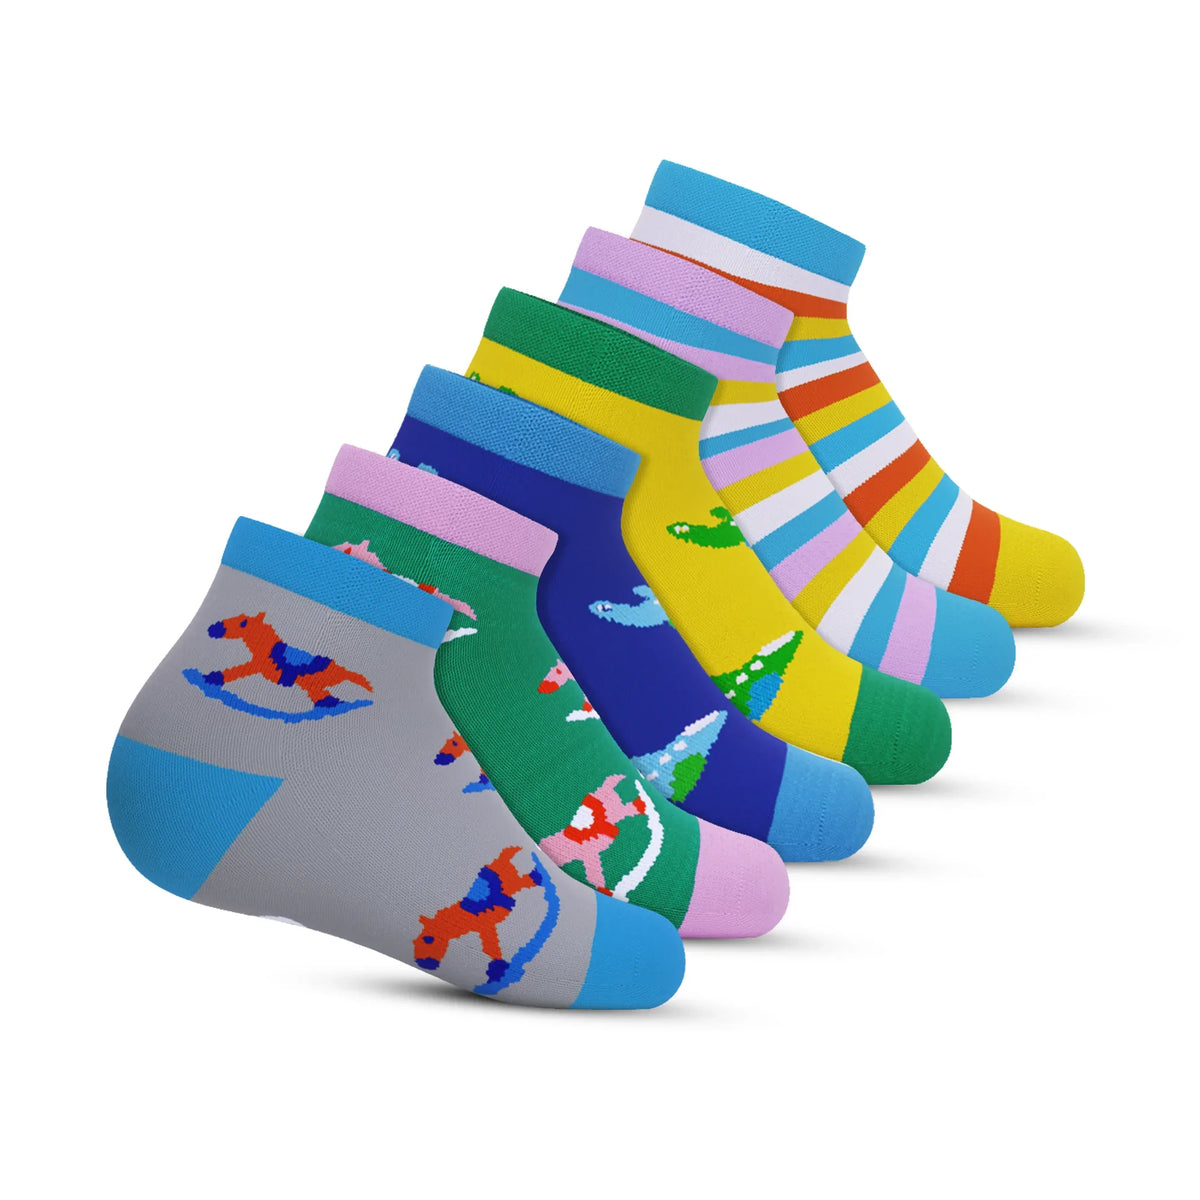 Ankle - play time - Grey & Green, take off - Yellow & Royal blue, hide seek - Pink & Sky blue - Pack of 6